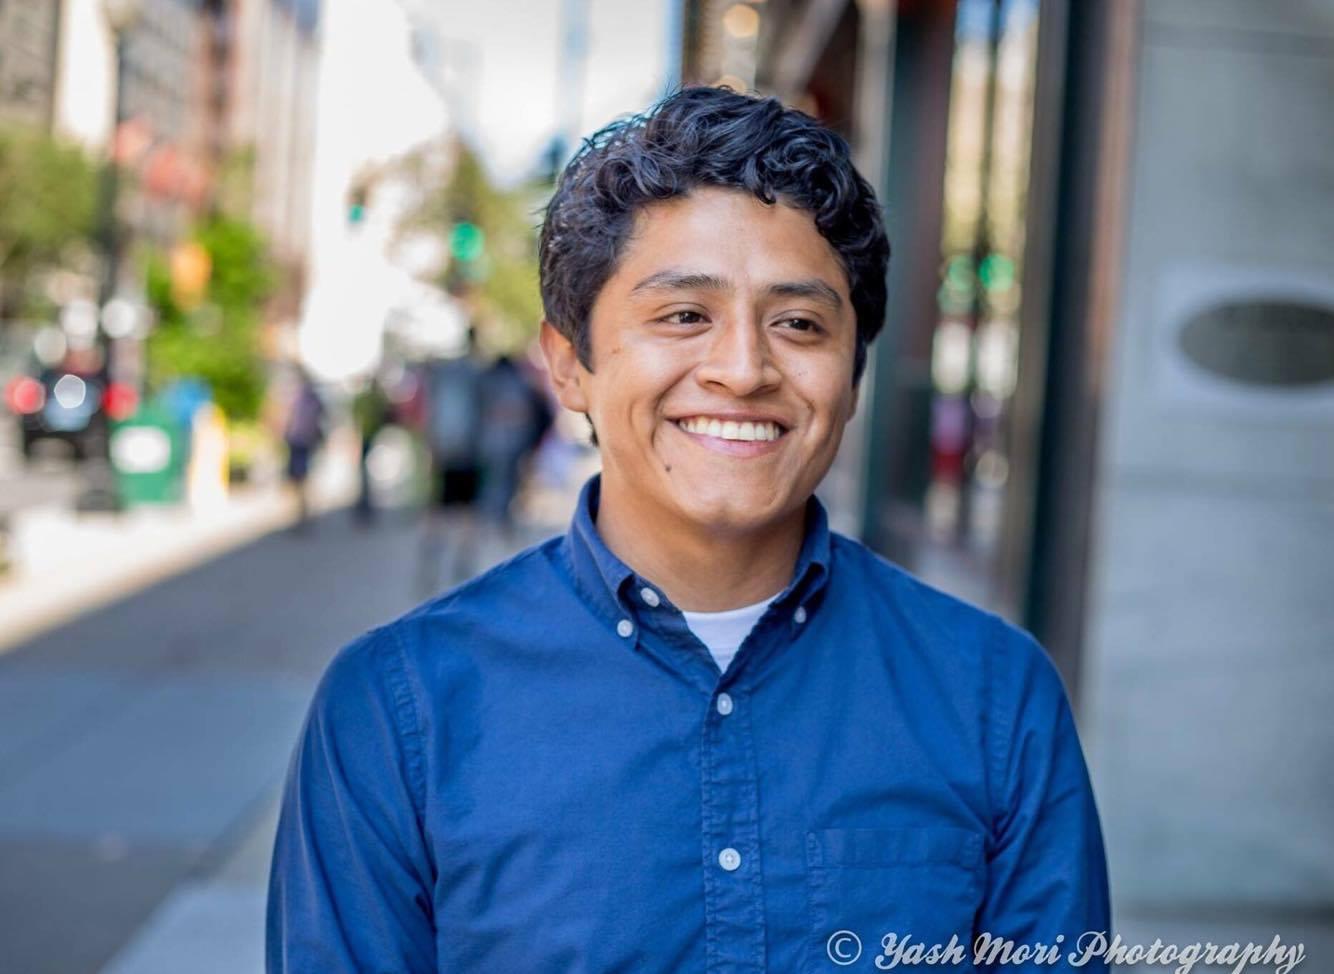 Oliver Merino is a museum educator and an activist for the rights of Dreamers — people brought to this country at a young age, without documents. 